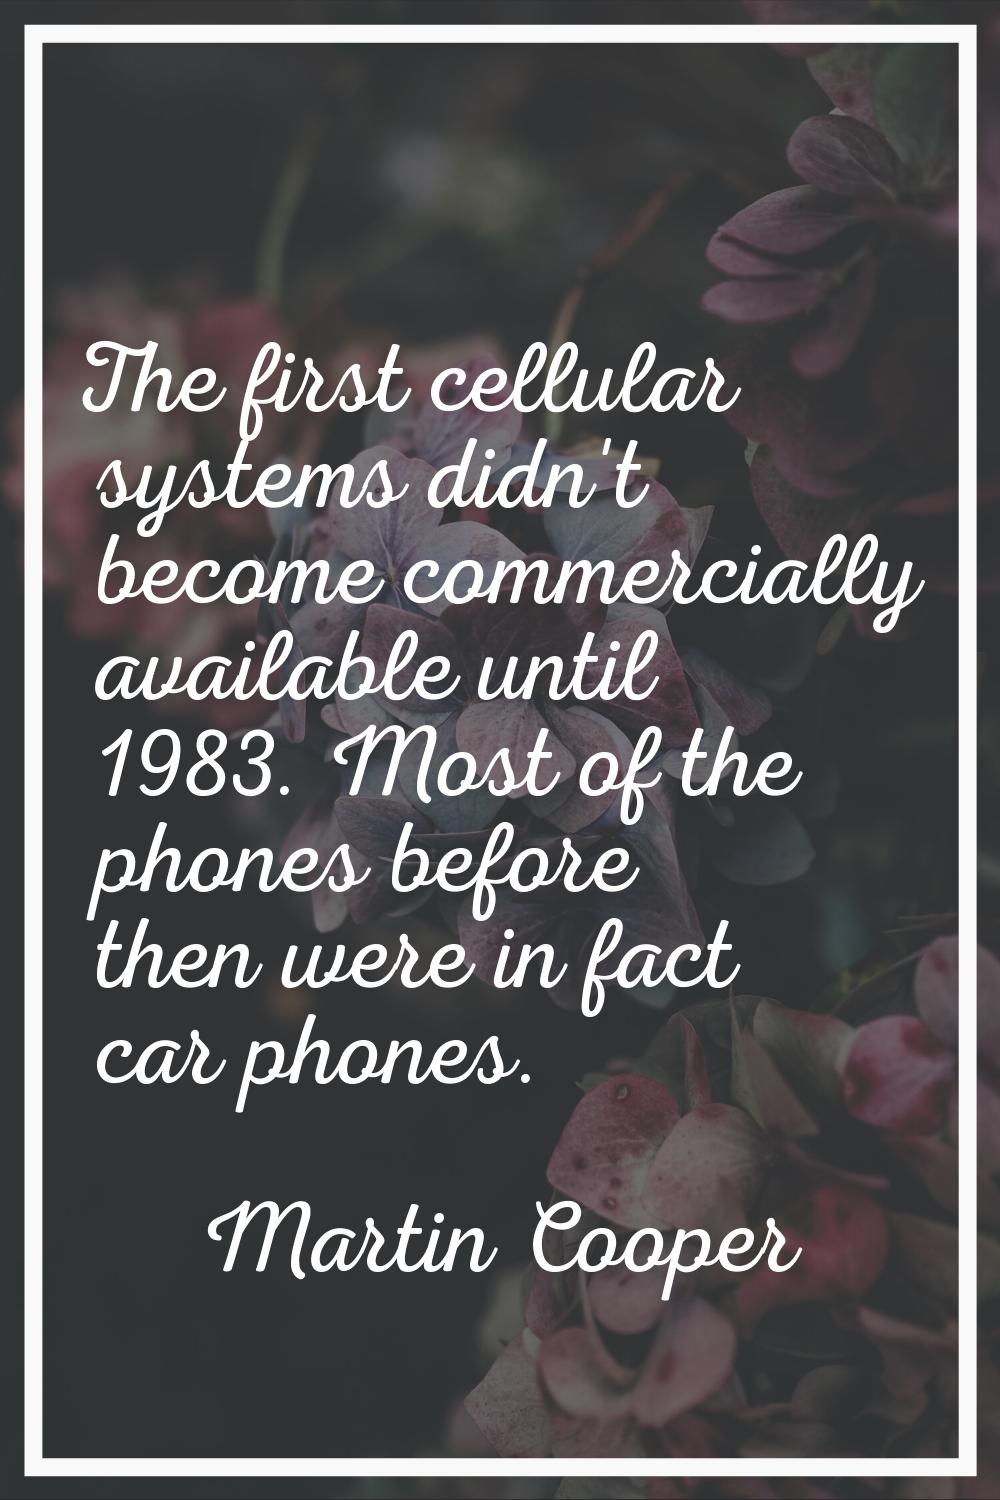 The first cellular systems didn't become commercially available until 1983. Most of the phones befo